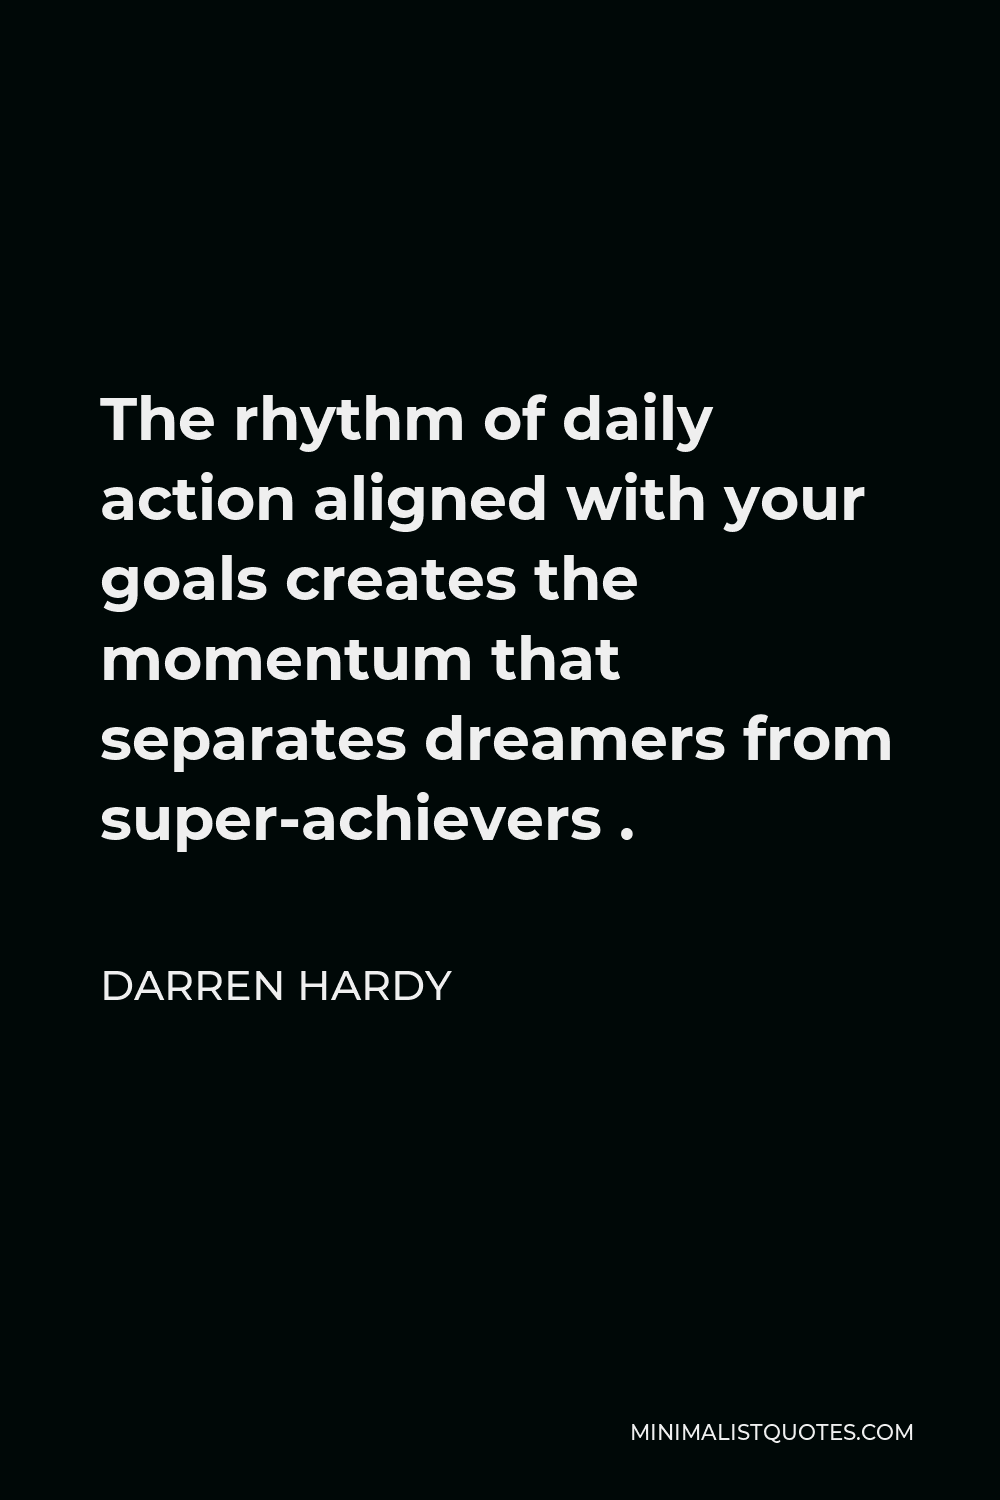 Darren Hardy Quote - The rhythm of daily action aligned with your goals creates the momentum that separates dreamers from super-achievers .